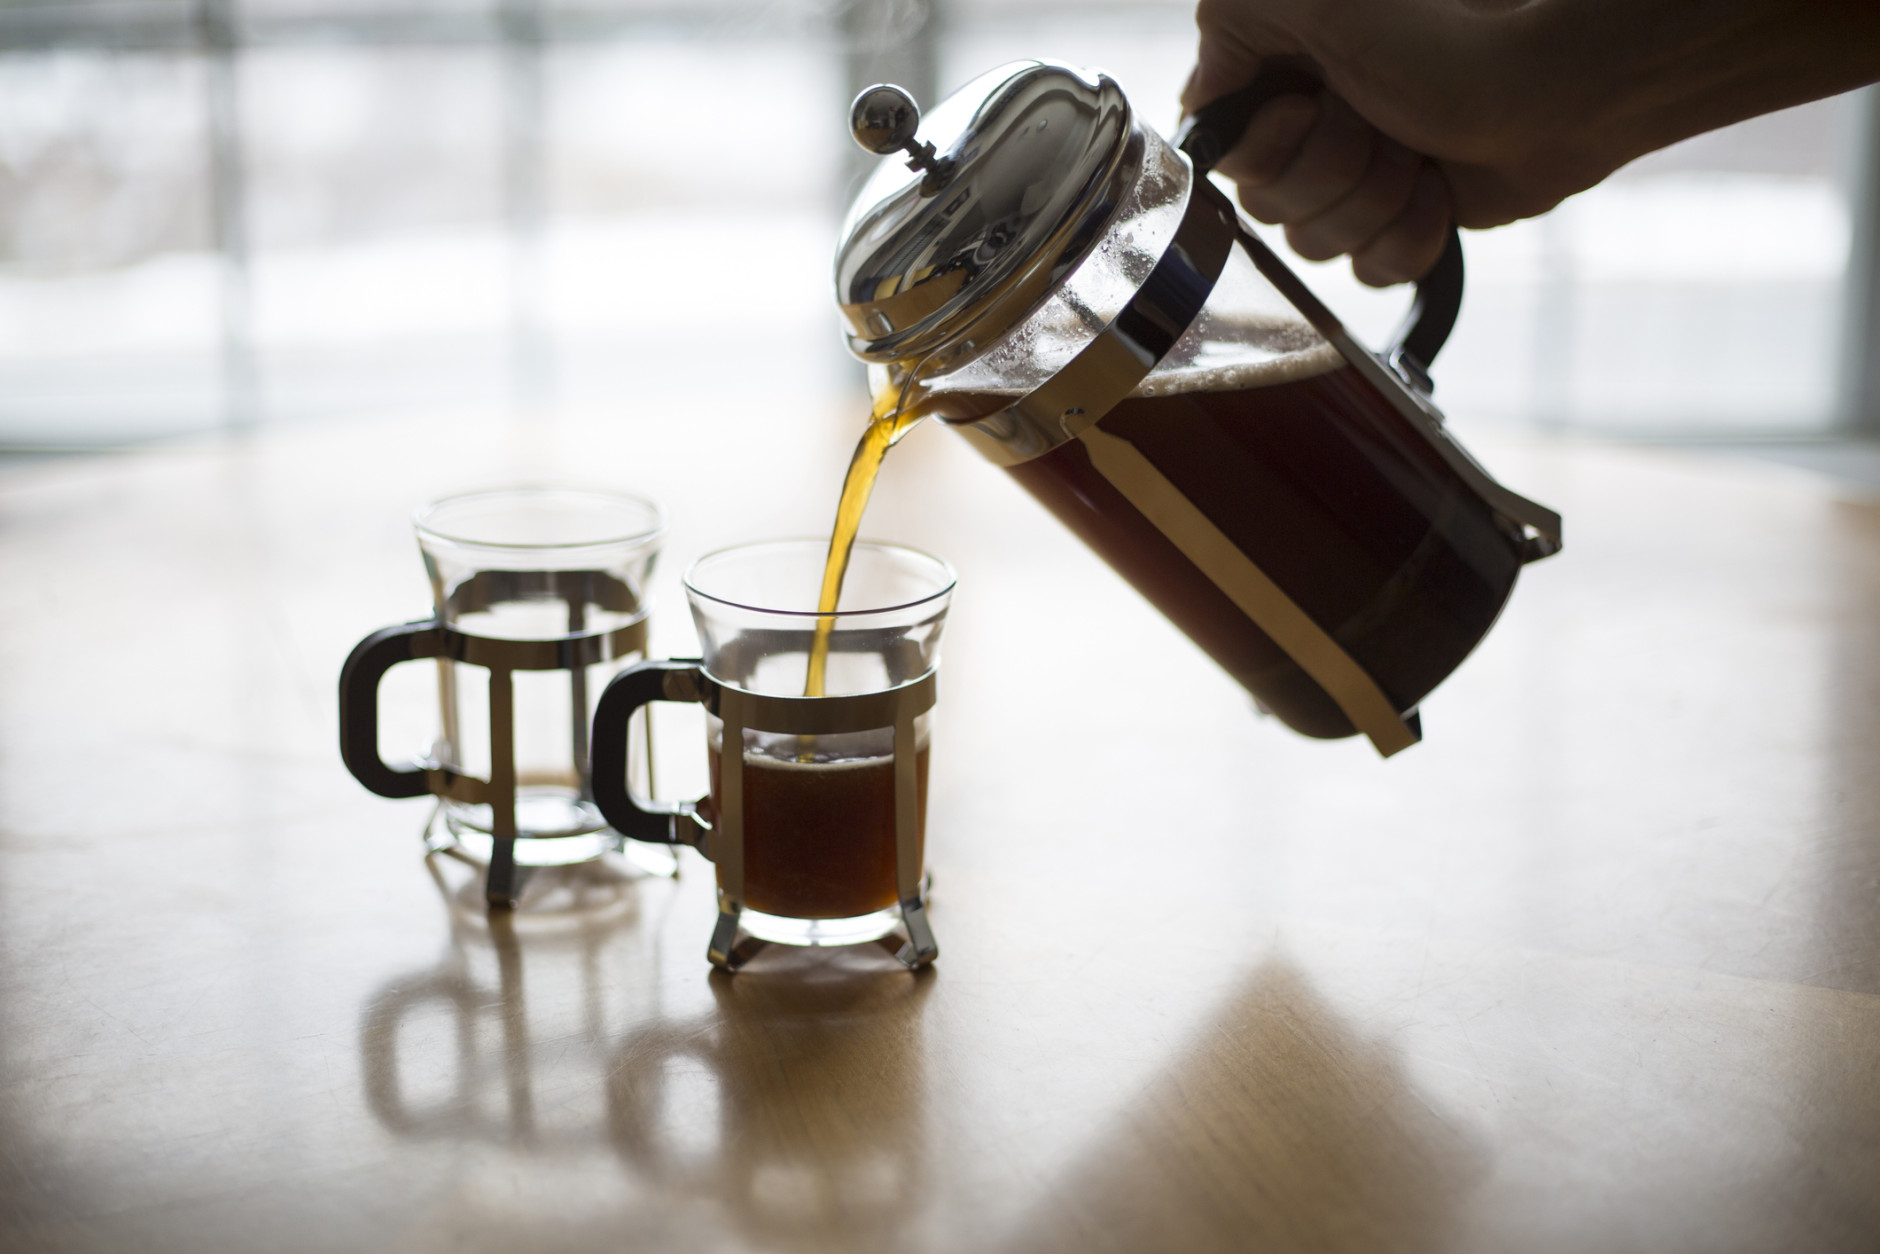 A back lit image of coffee being poured into small coffee mugs from a French Press with the light source being a window behind the table.